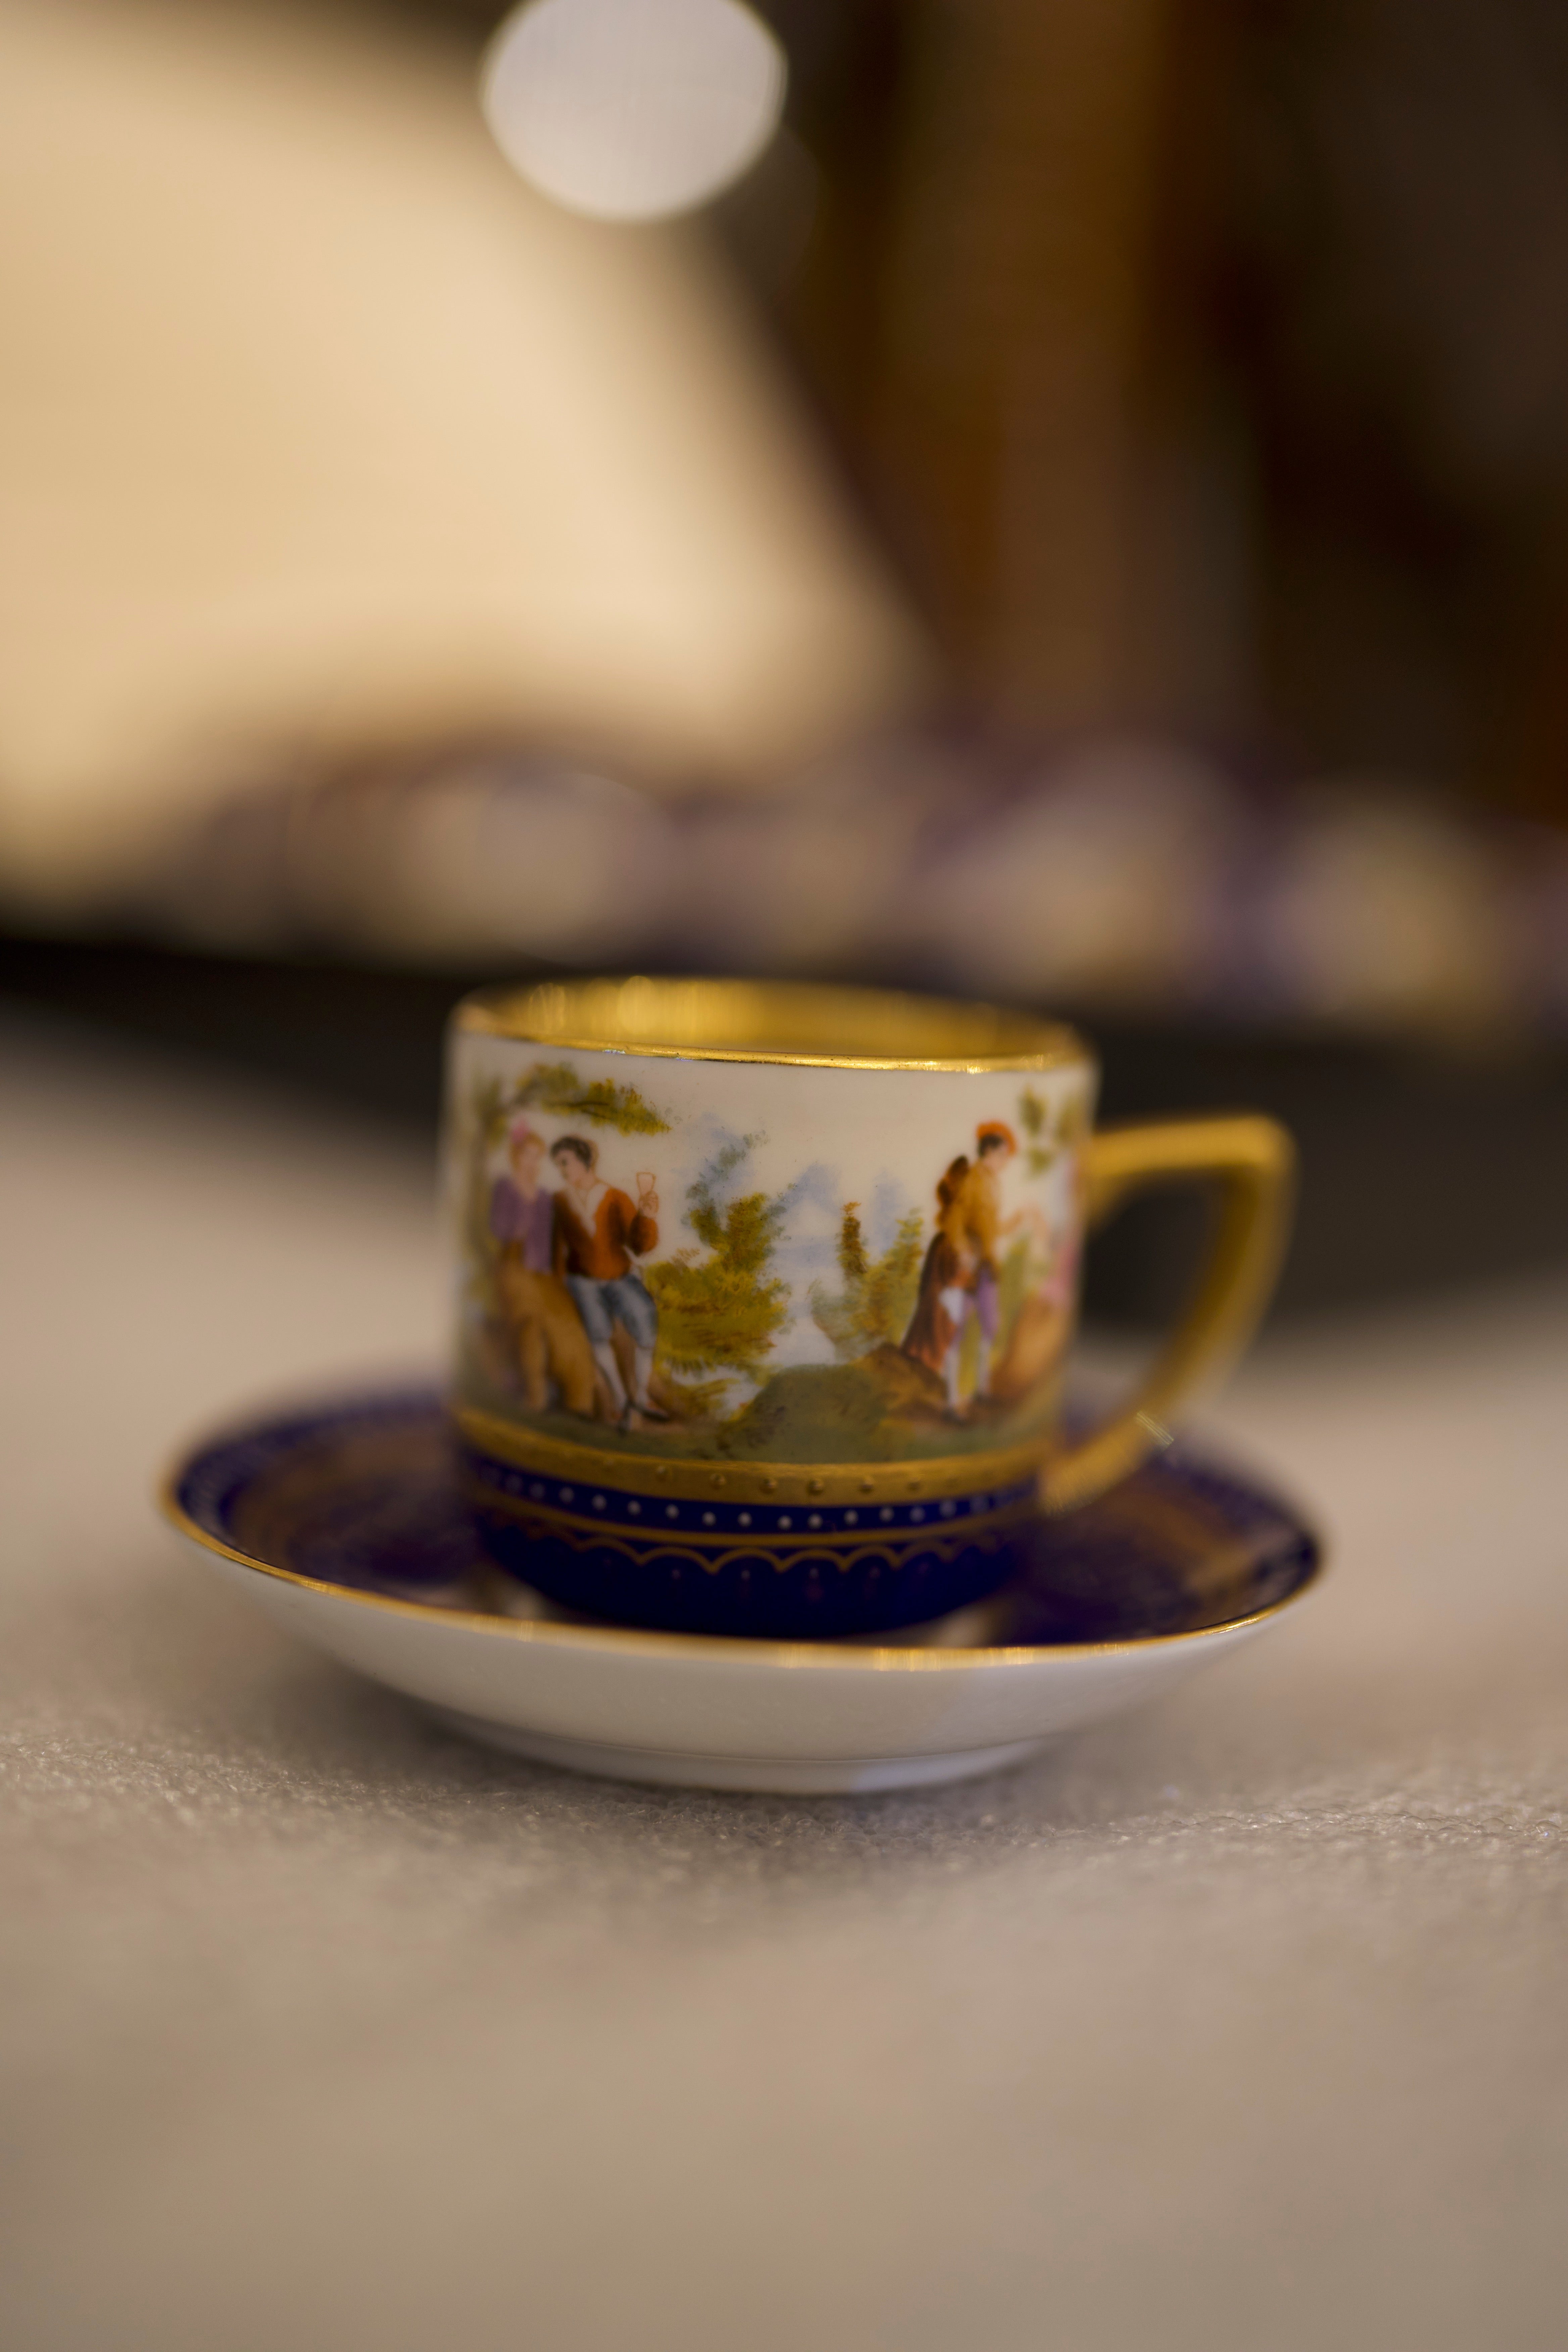 19th century Elegant 12 Piece painted, cobalt blue porcelain cups and saucers, with a genre, Neapolitan scene; cylindrical shape, with a rectangular handle. Decorated with gold.